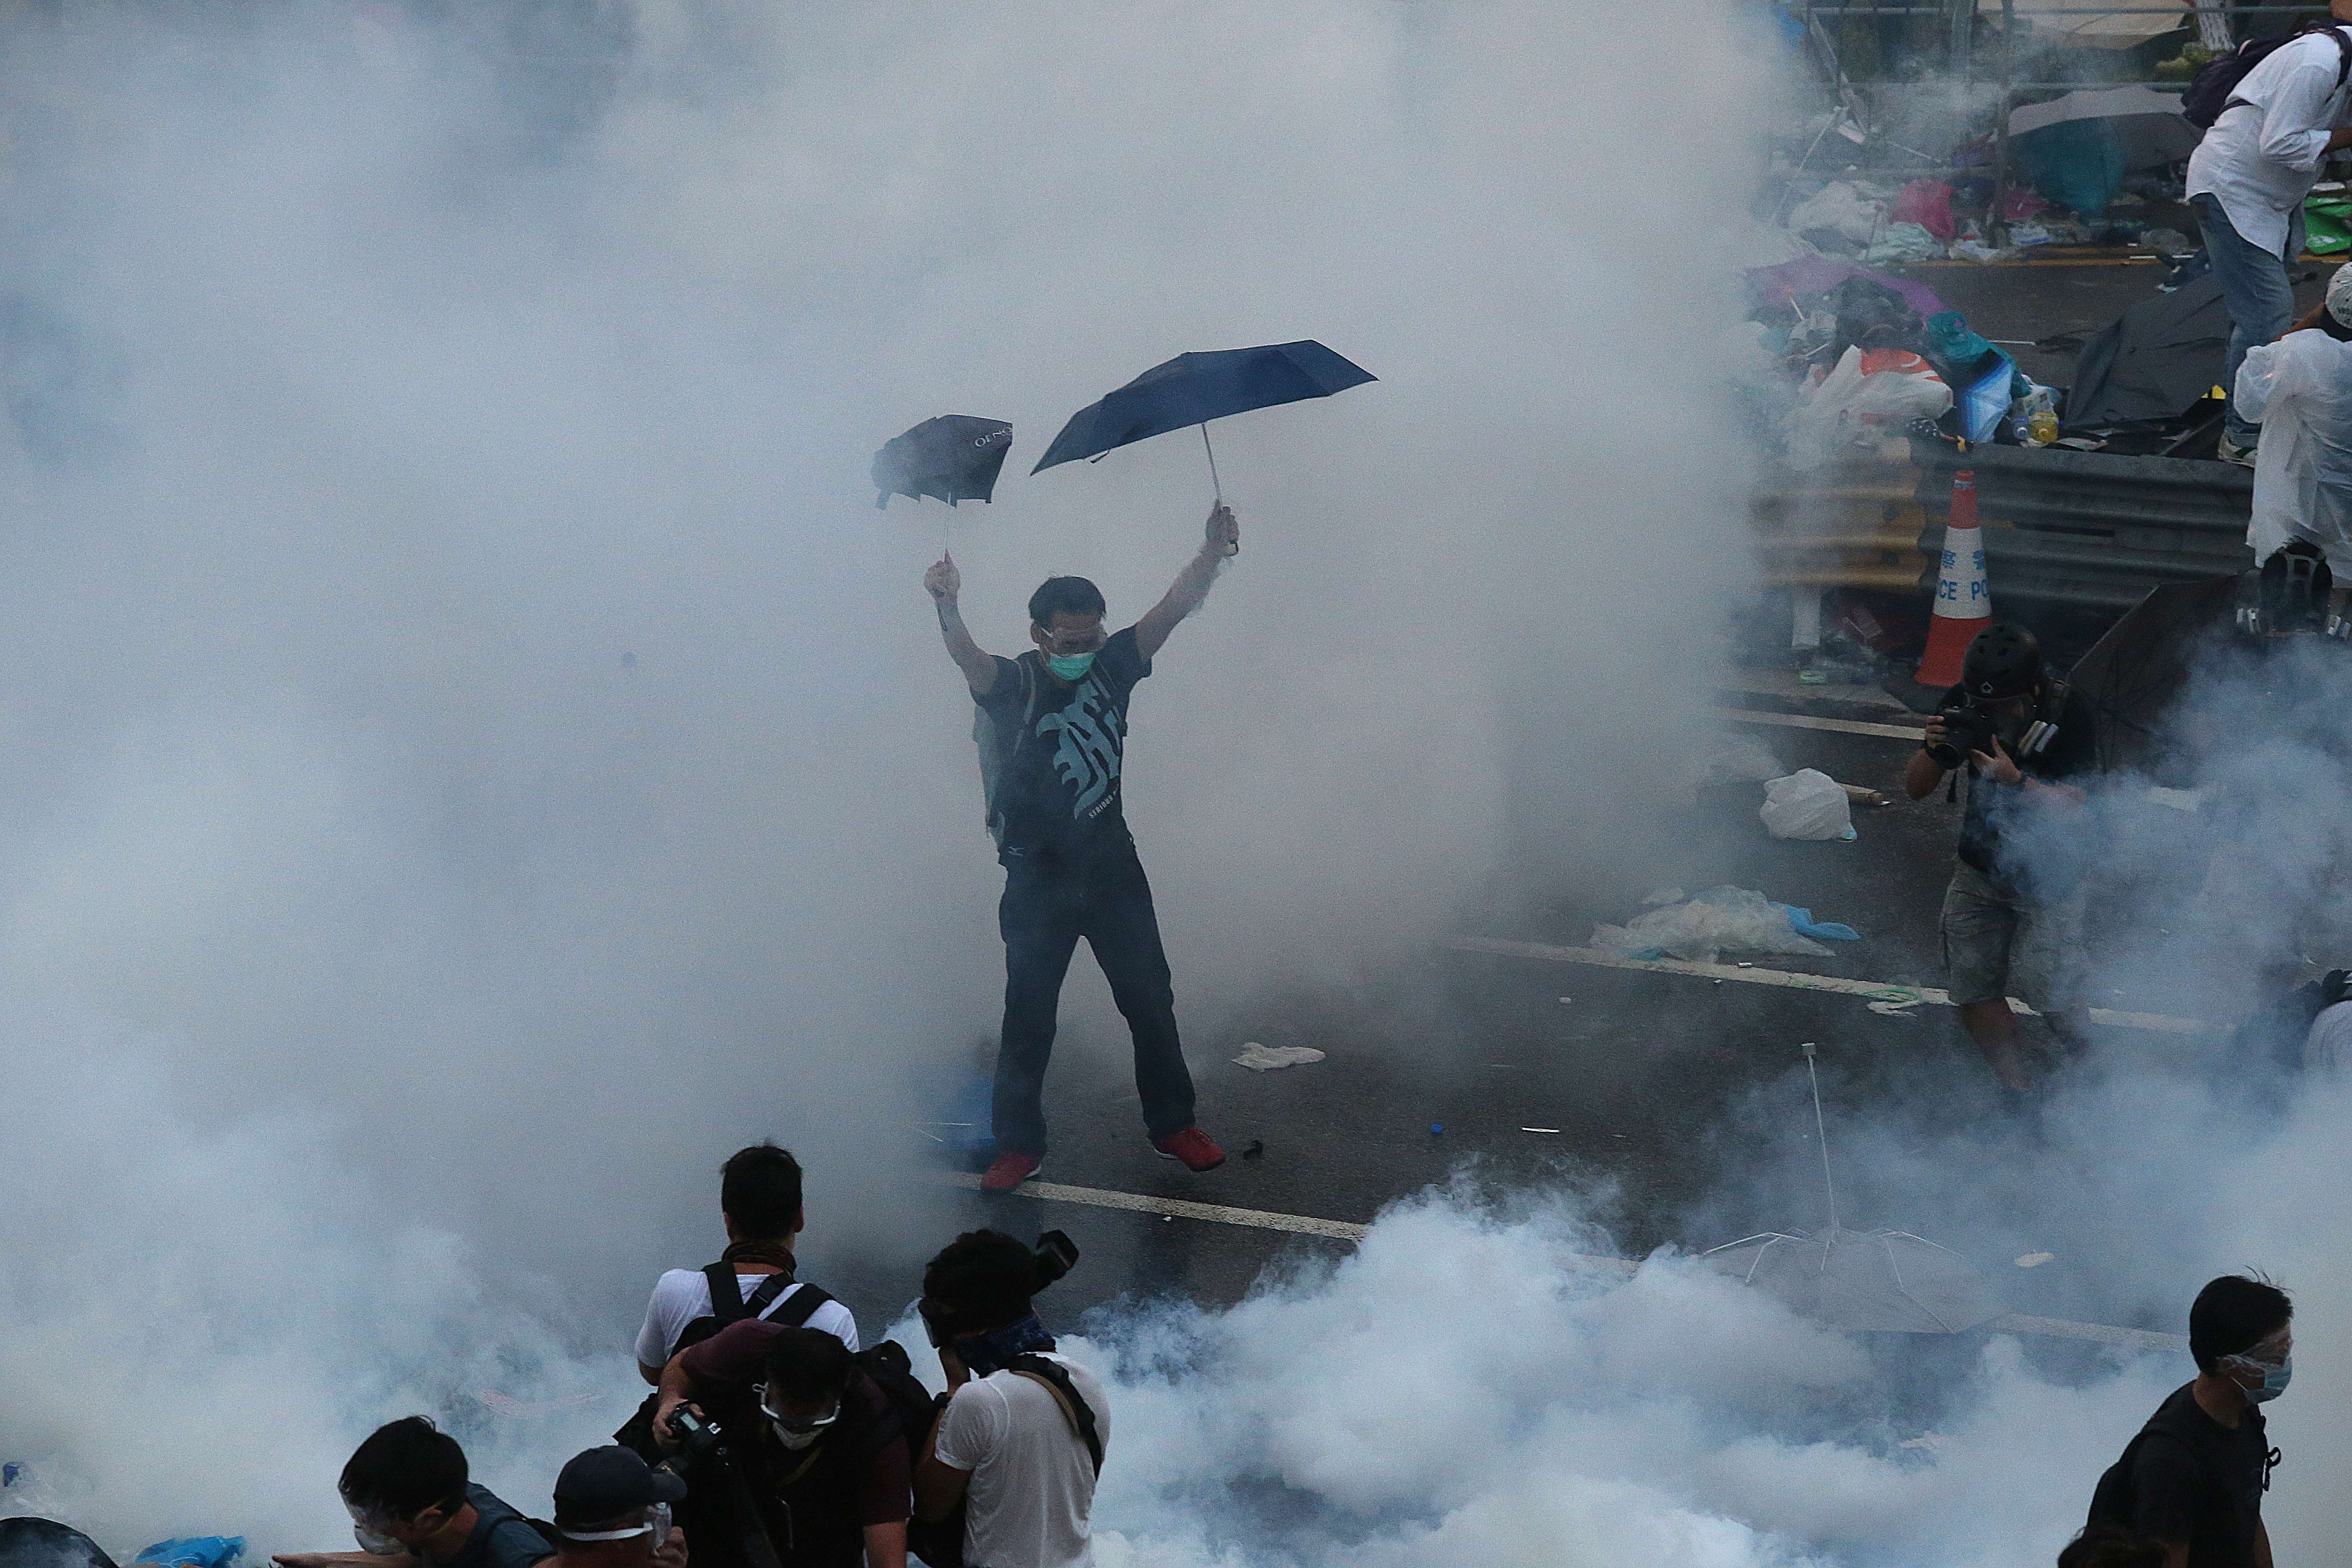 The police fire tear gas at protesters on Harcourt Road in Admiralty, Hong Kong, during Occupy Central. The movement will have enhanced Beijing’s suspicion and its determination to cut Hong Kong down to size. File photo